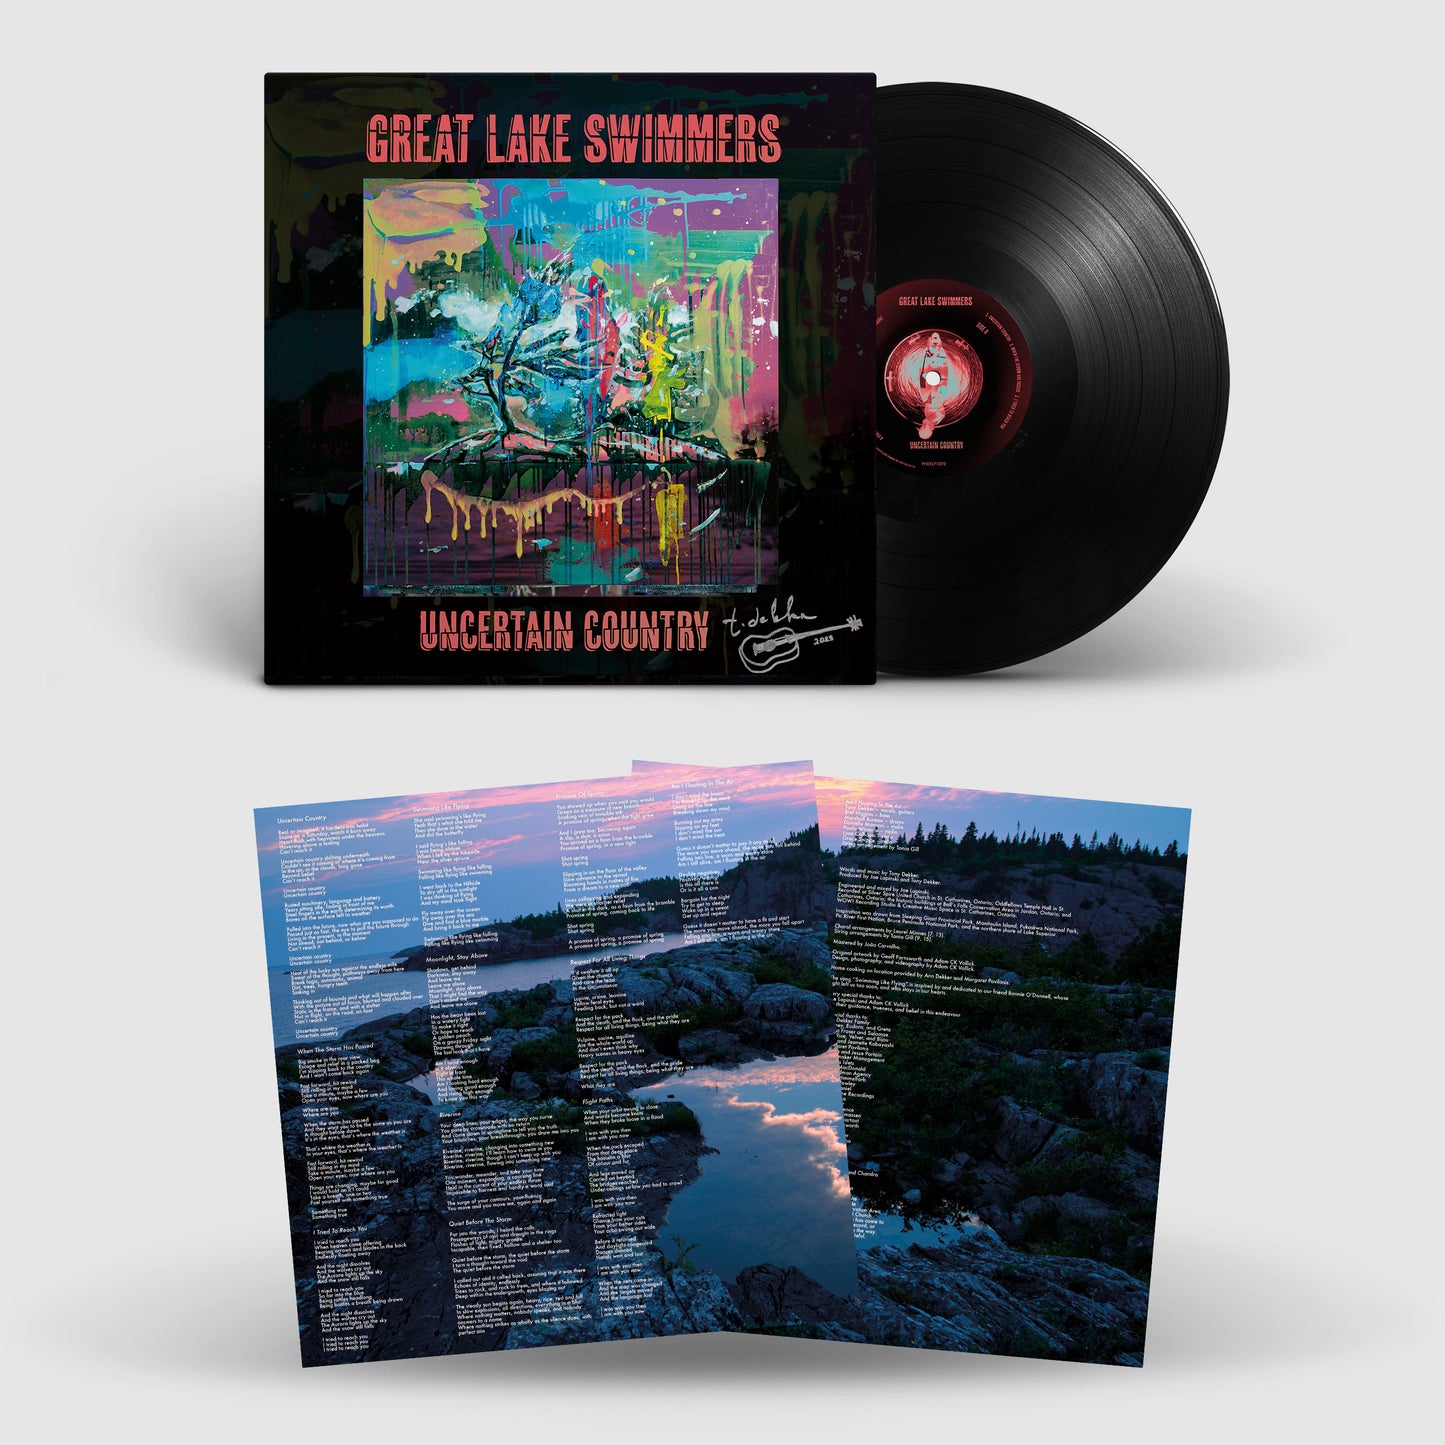 Great Lake Swimmers - "Uncertain Country" (2023) Vinyl LP (Signed)